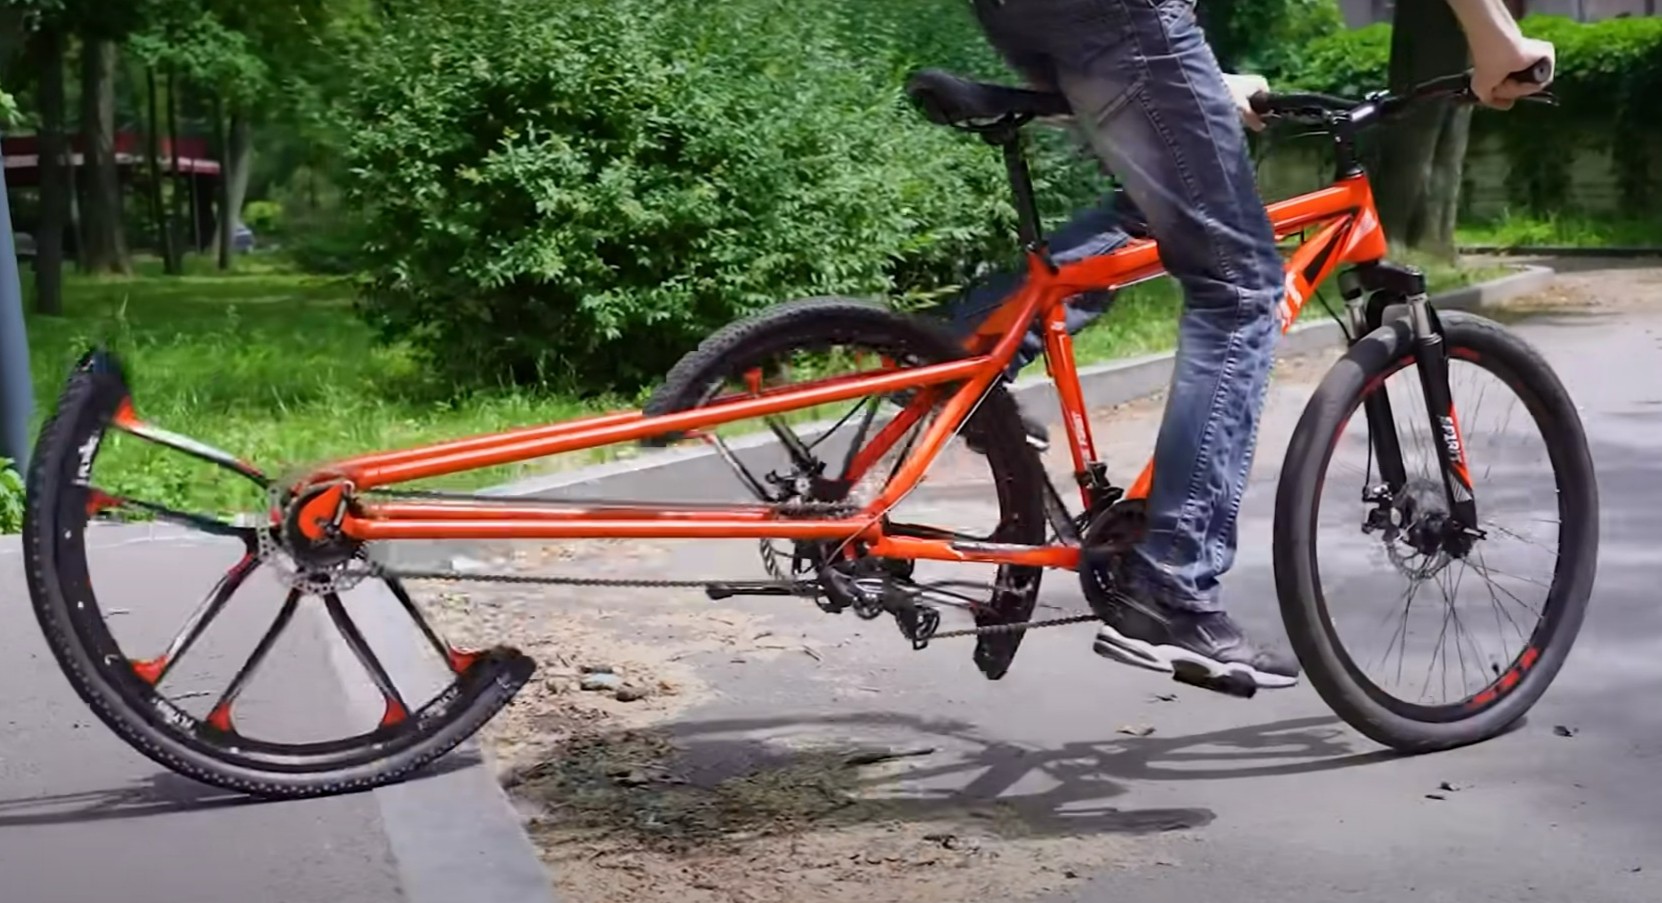 the wonders of mathematics are responsible for functional one off designs like this bike 1